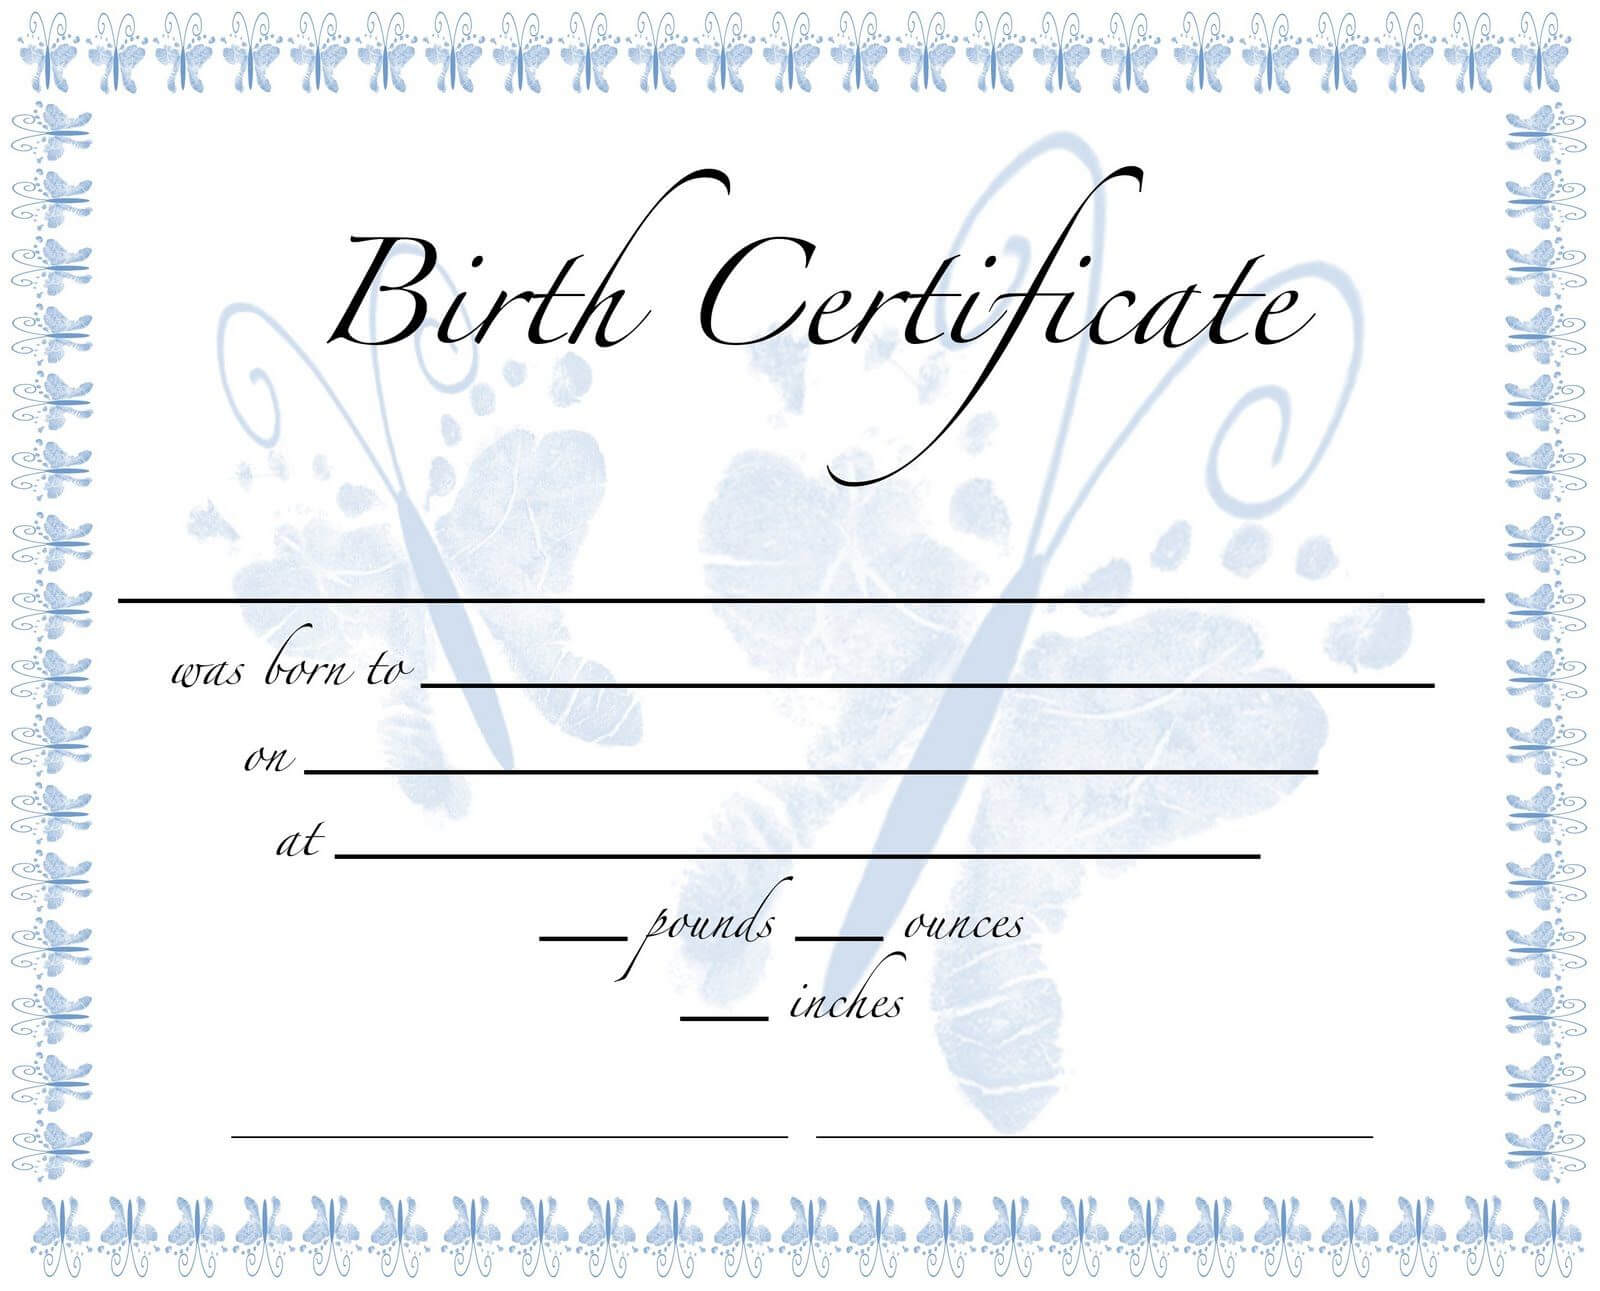 Birth Certificate Fake Template Business Plan Templates